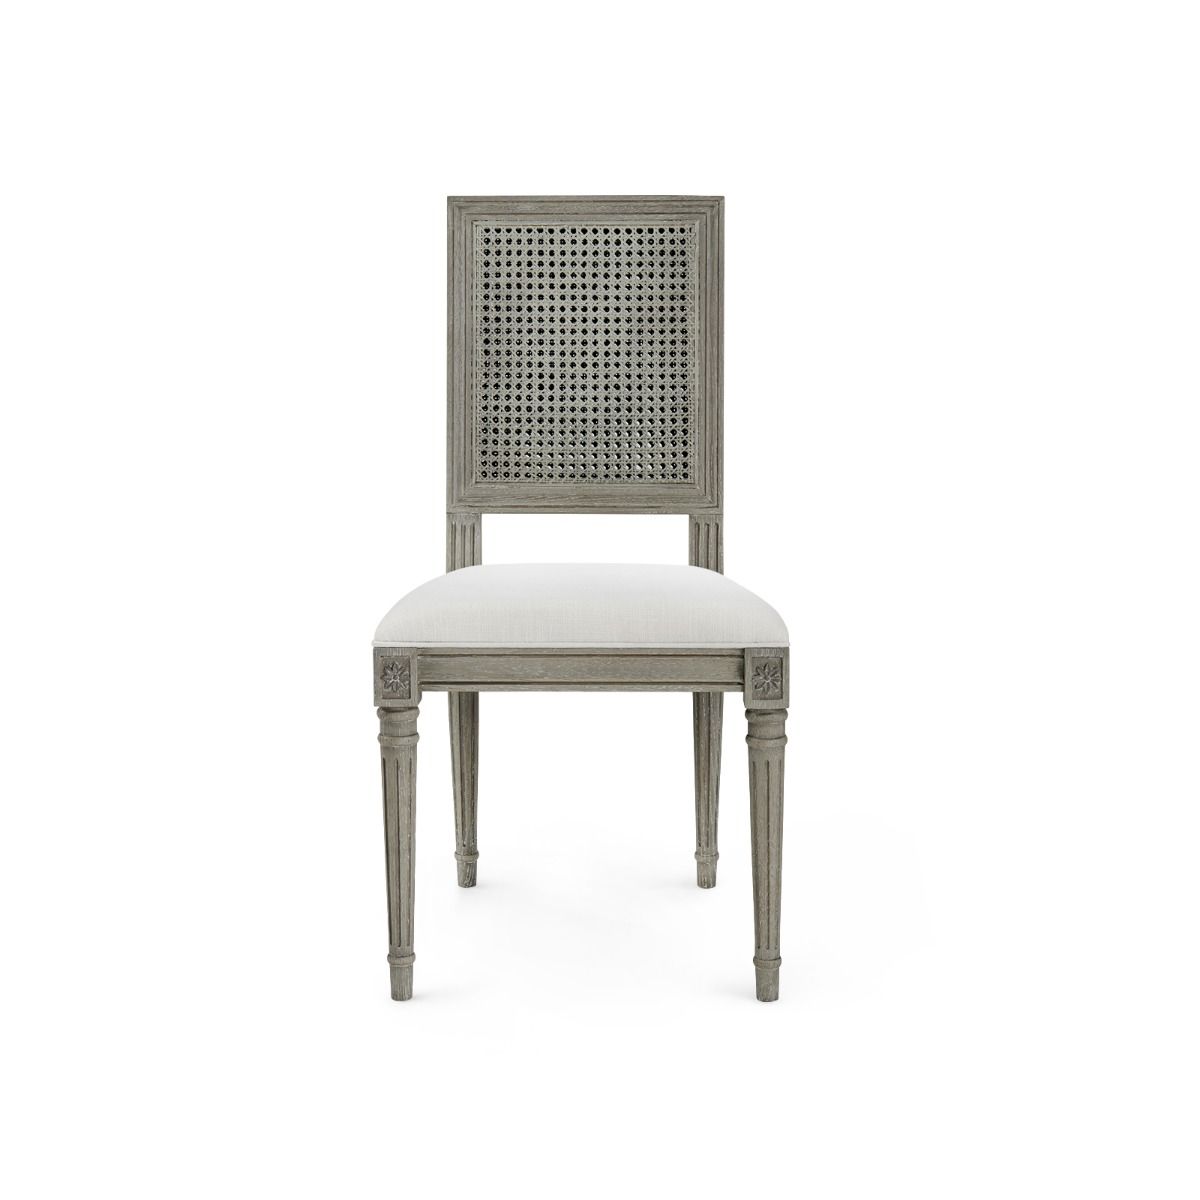 Annette Side Chair Dining Chair Bungalow 5     Four Hands, Burke Decor, Mid Century Modern Furniture, Old Bones Furniture Company, Old Bones Co, Modern Mid Century, Designer Furniture, https://www.oldbonesco.com/